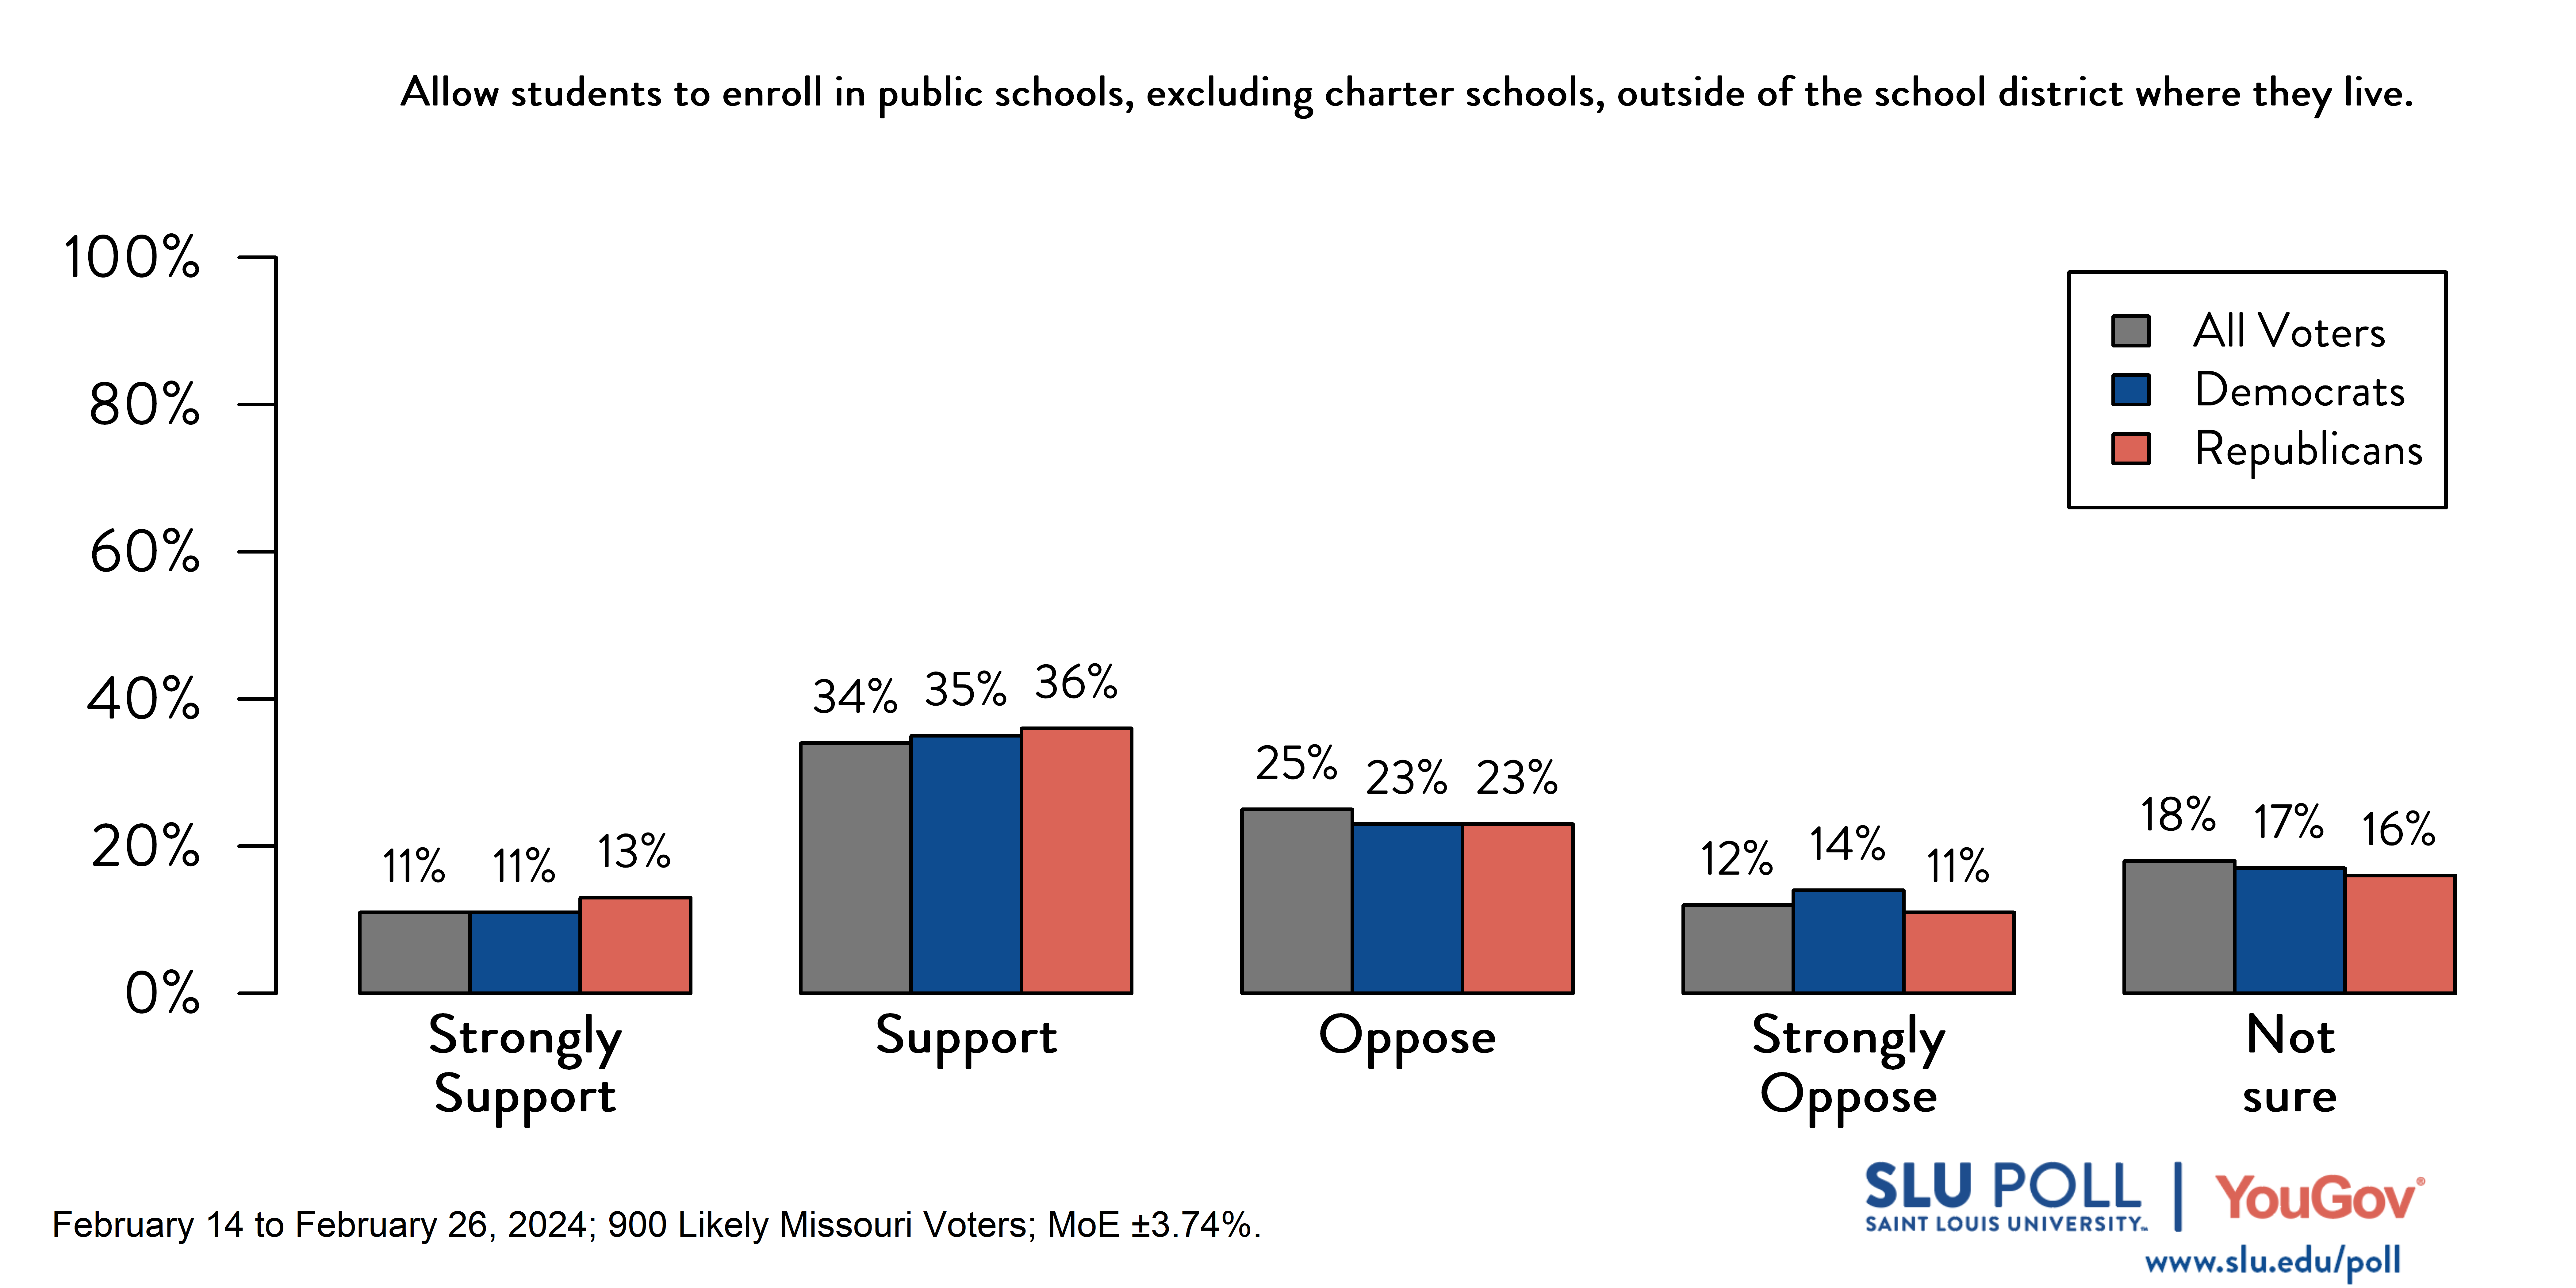 Likely voters' responses to 'Do you support or oppose the following policies…Allow students to enroll in public schools, excluding charter schools, outside of the school district where they live?': 11% Strongly support, 34% Support, 25% Oppose, 12% Strongly oppose, and 18% Not sure. Democratic voters' responses: ' 11% Strongly support, 35% Support, 23% Oppose, 14% Strongly oppose, and 17% Not sure. Republican voters' responses:  13% Strongly support, 36% Support, 23% Oppose, 11% Strongly oppose, and 16% Not sure.